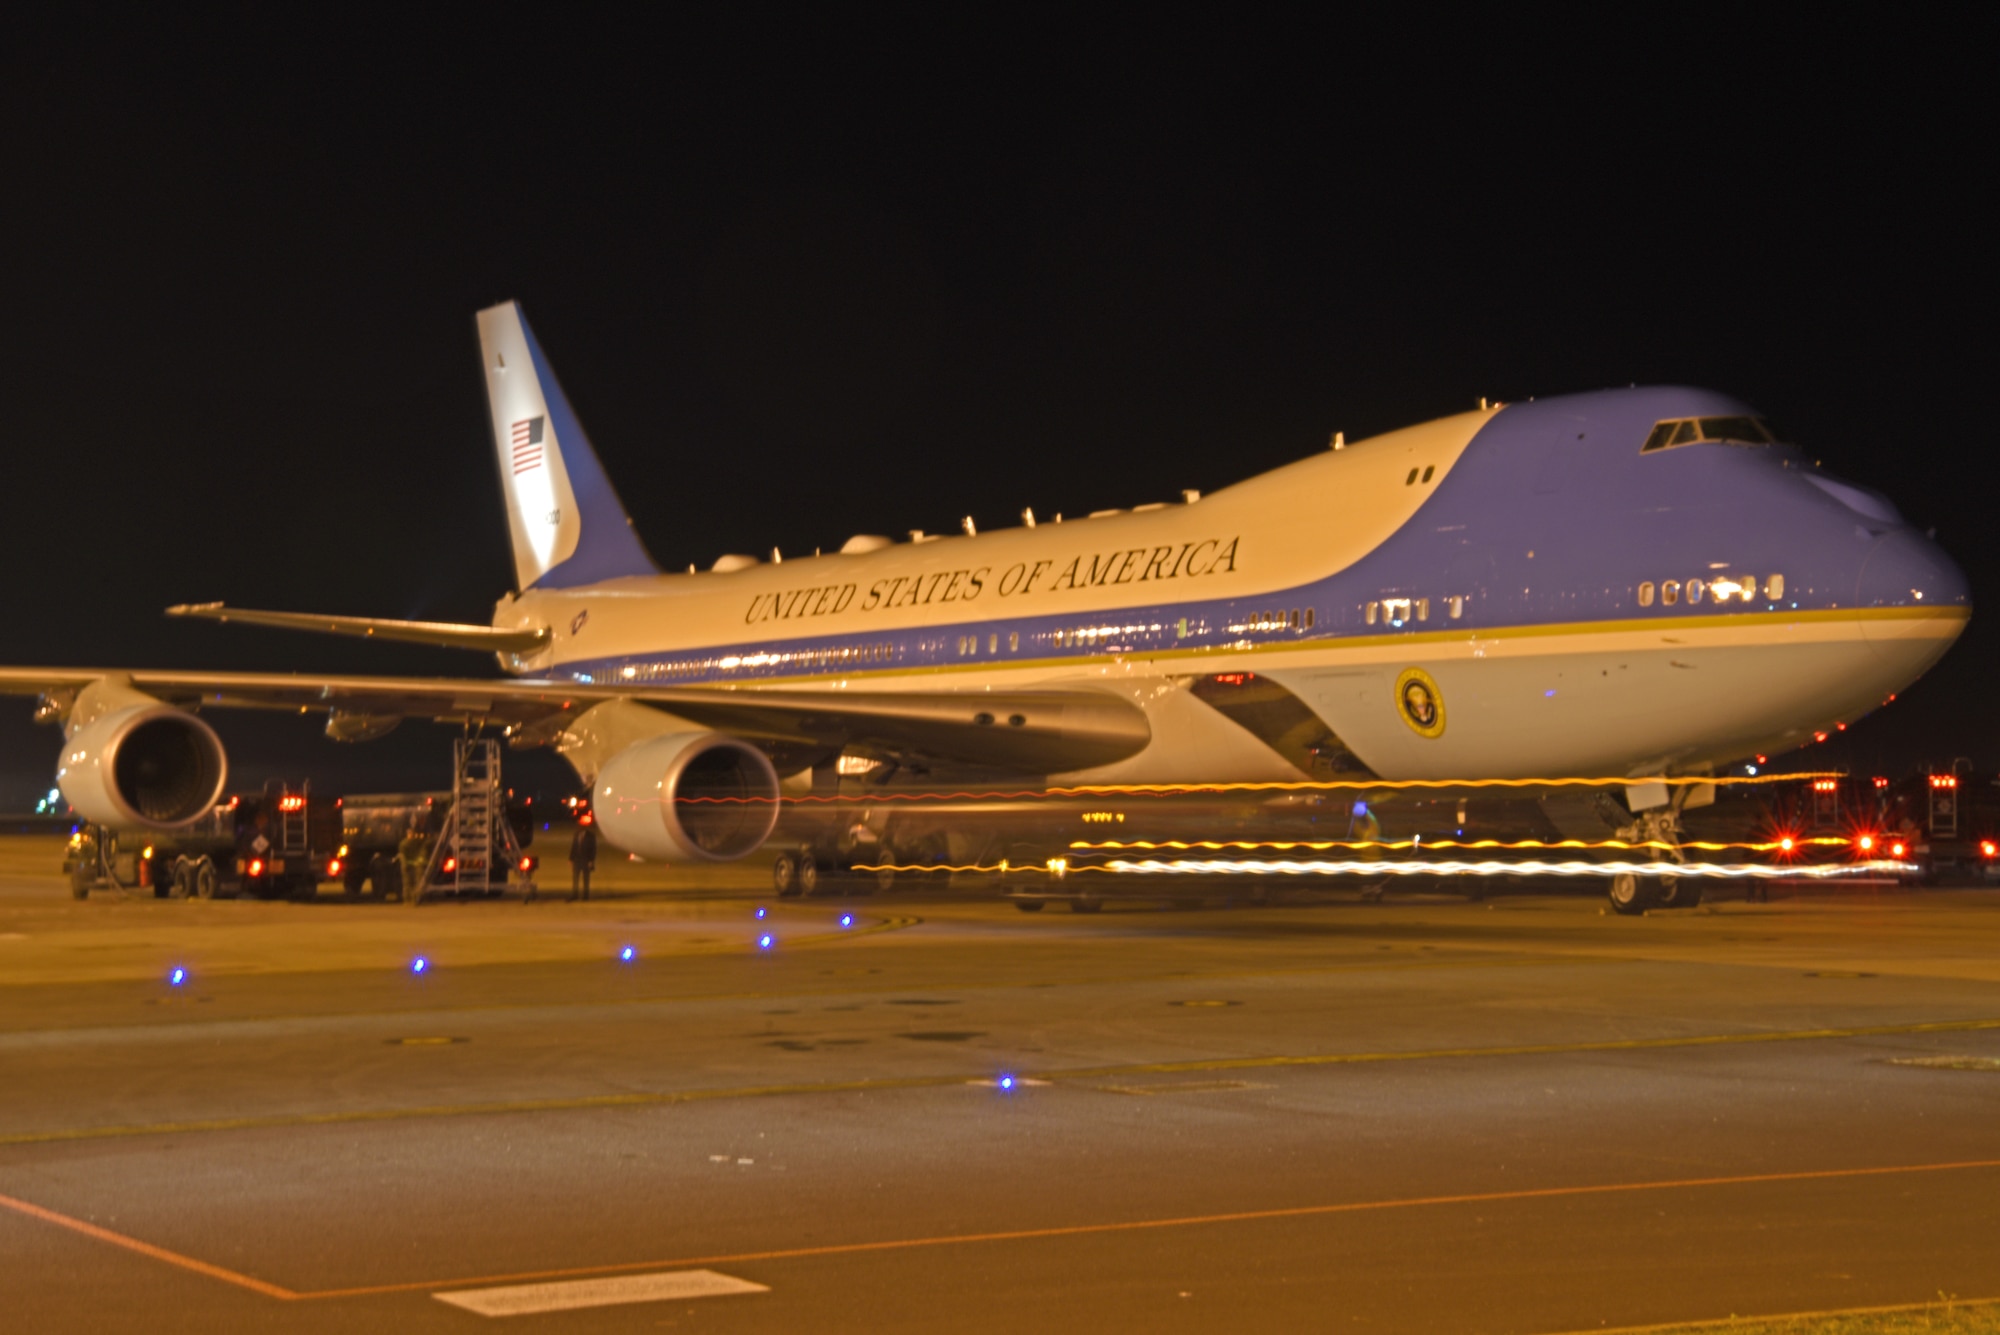 Air Force One receives fuel during a stop at RAF Mildenhall, England, Feb. 26, 2019. Air Force One, carrying President Donald J. Trump and a contingency of White House officials and media members, received fuel and logistical support before continuing on the journey to Hanoi, the capital city of Vietnam, for the president’s second summit North Korean leader Kim-Jong Un. (U.S. Air Force photo by Airman 1st Class Brandon Esau)